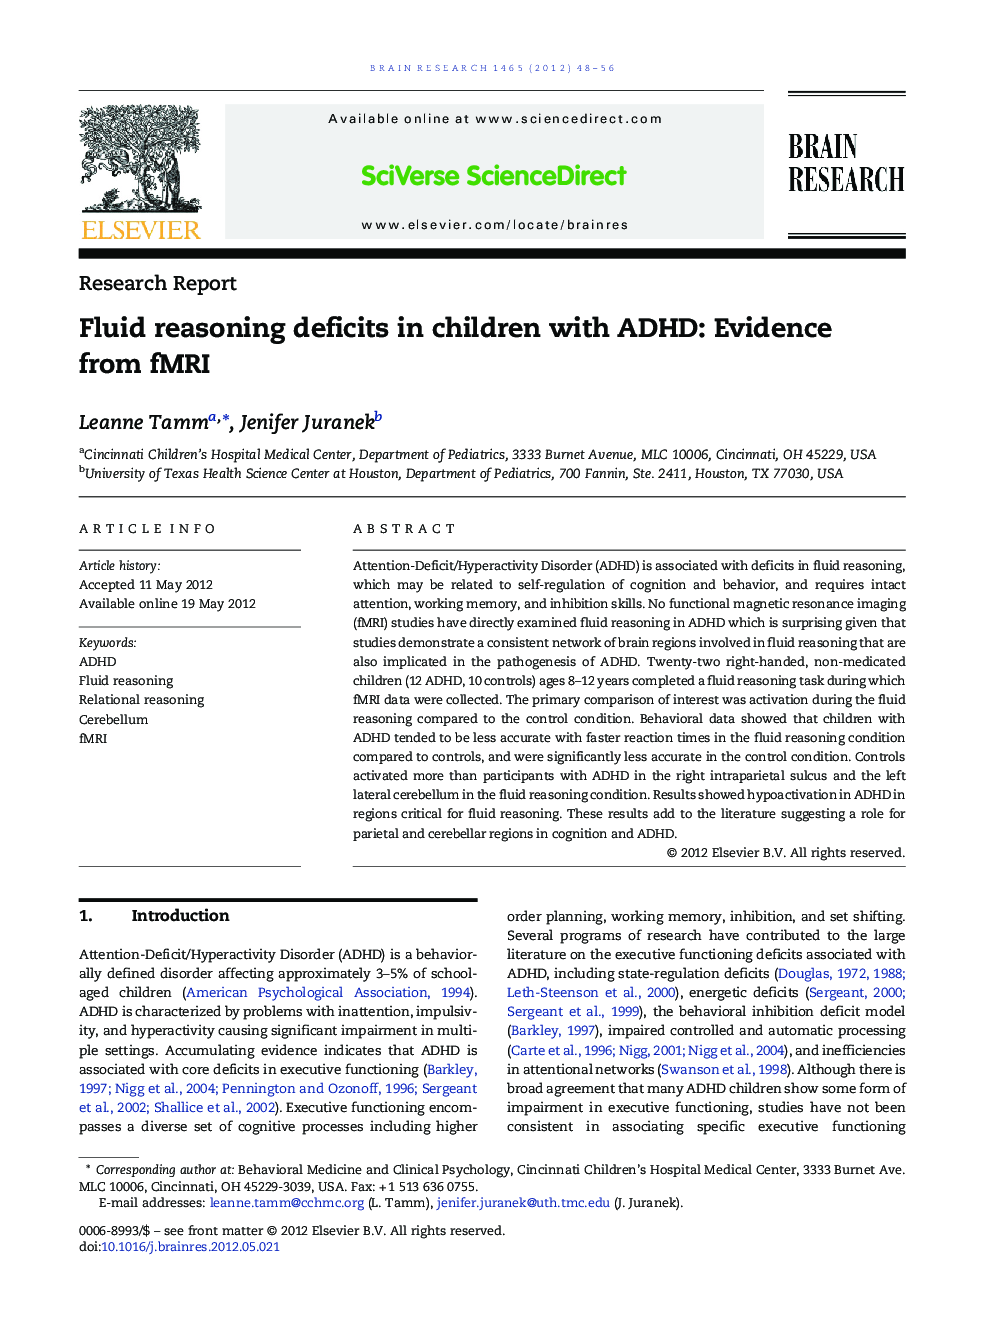 Research ReportFluid reasoning deficits in children with ADHD: Evidence from fMRI